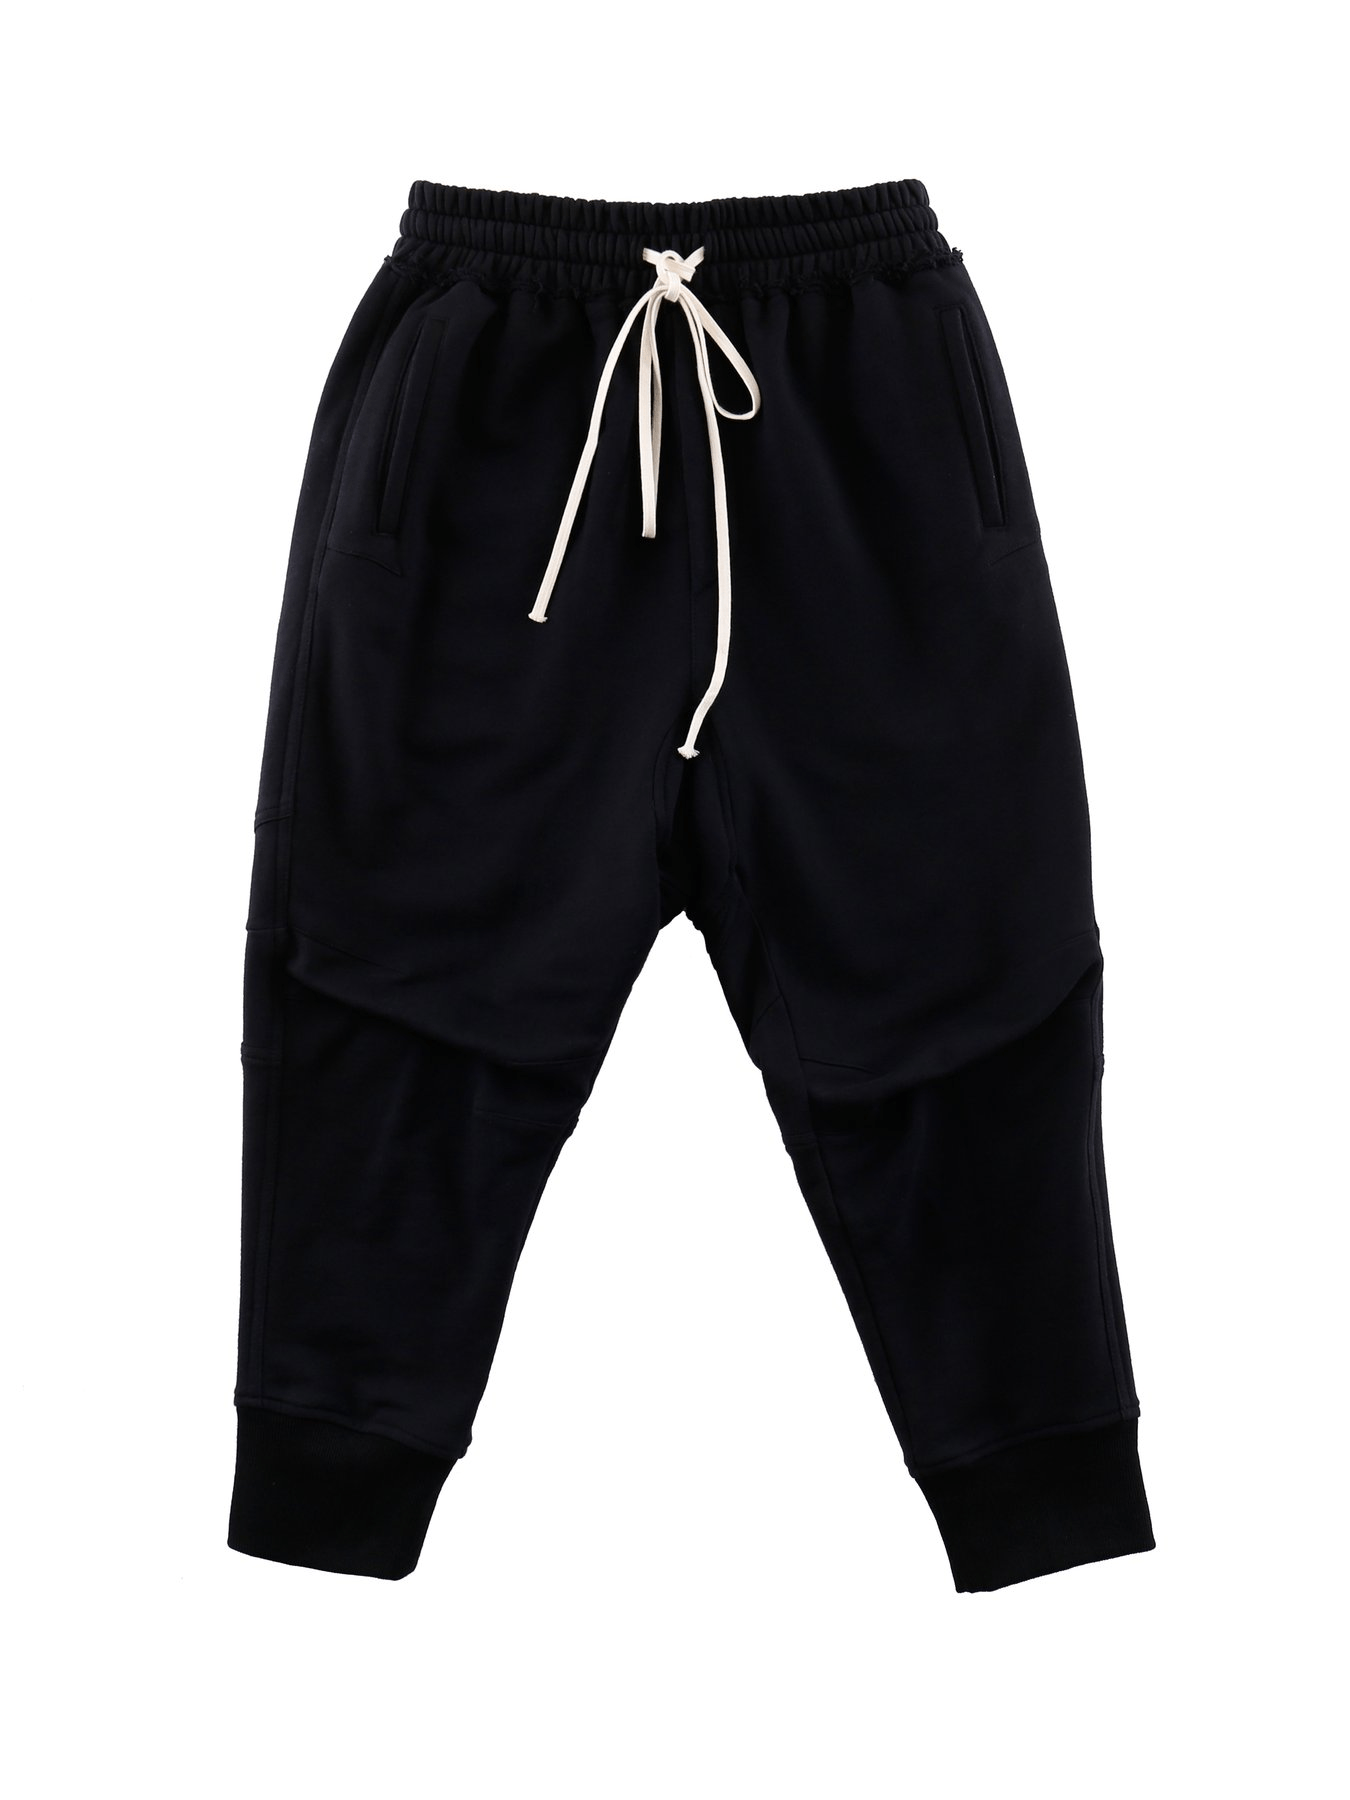 Costume Made IMPERFECTION basic black crotch pants | Grailed